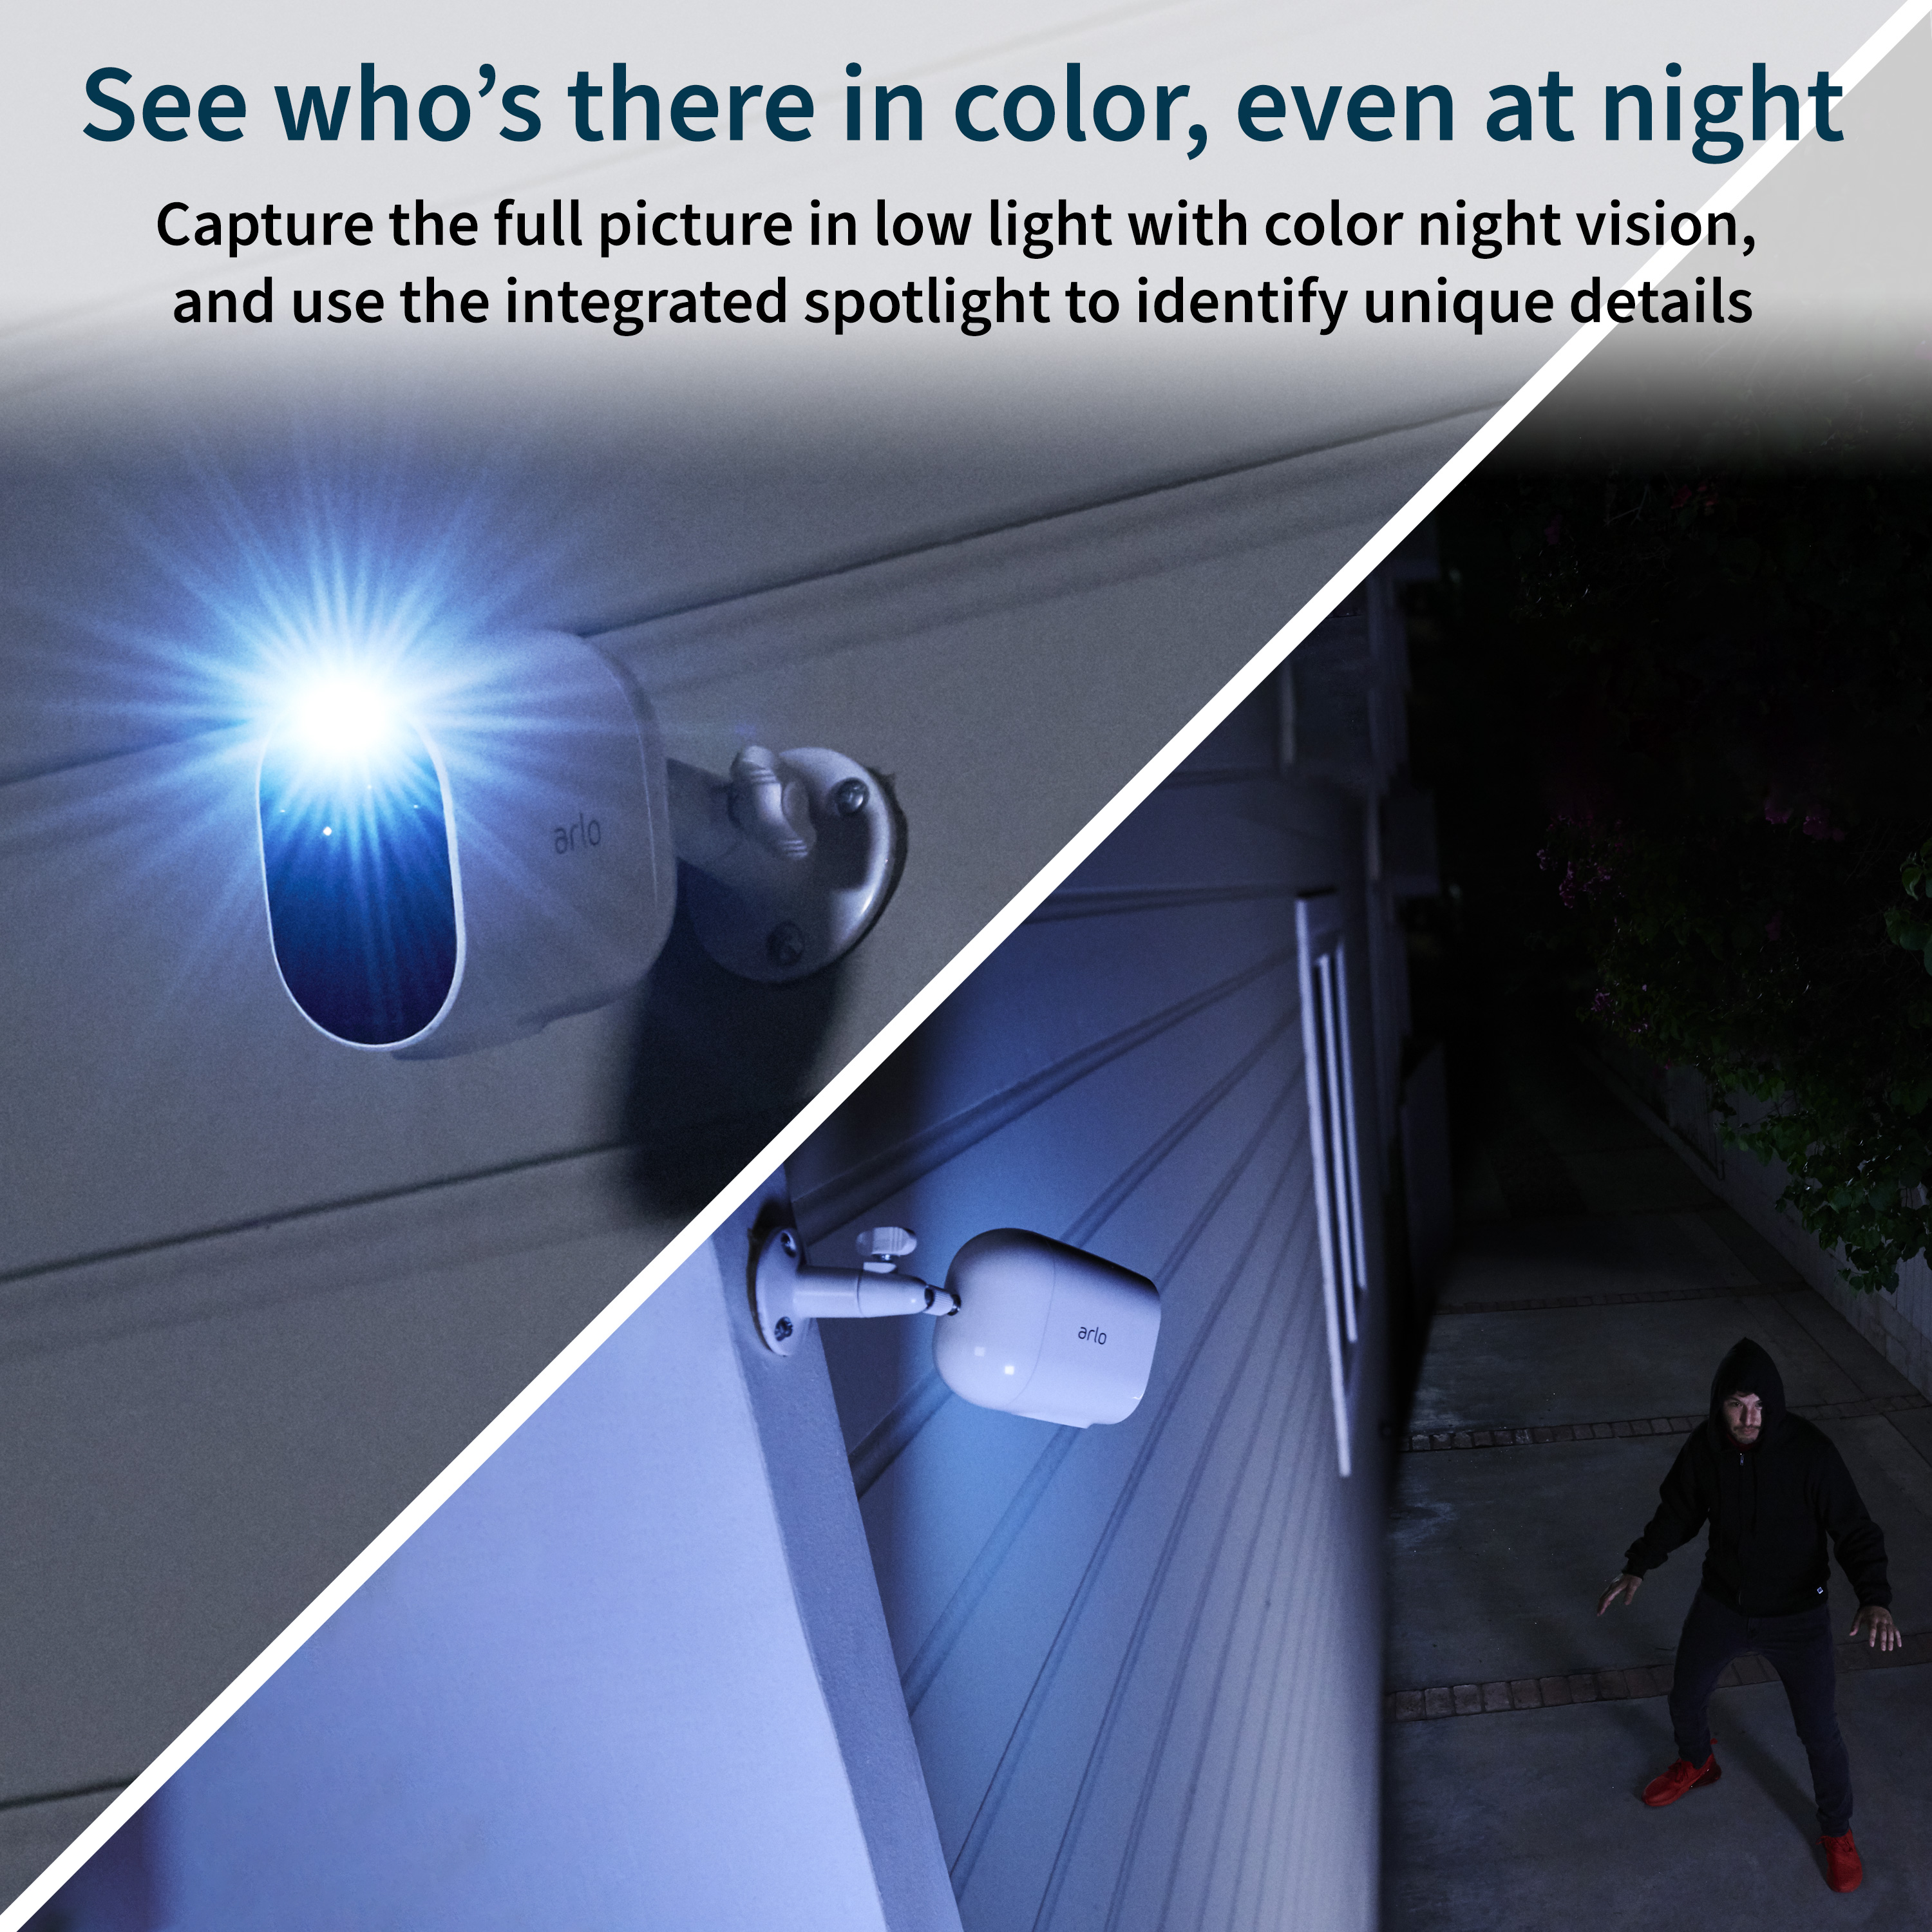 Arlo Essential Spotlight Wireless Security Camera - 3 Pack - 1080p Video Color Night Vision, White VMC2330W - image 3 of 9